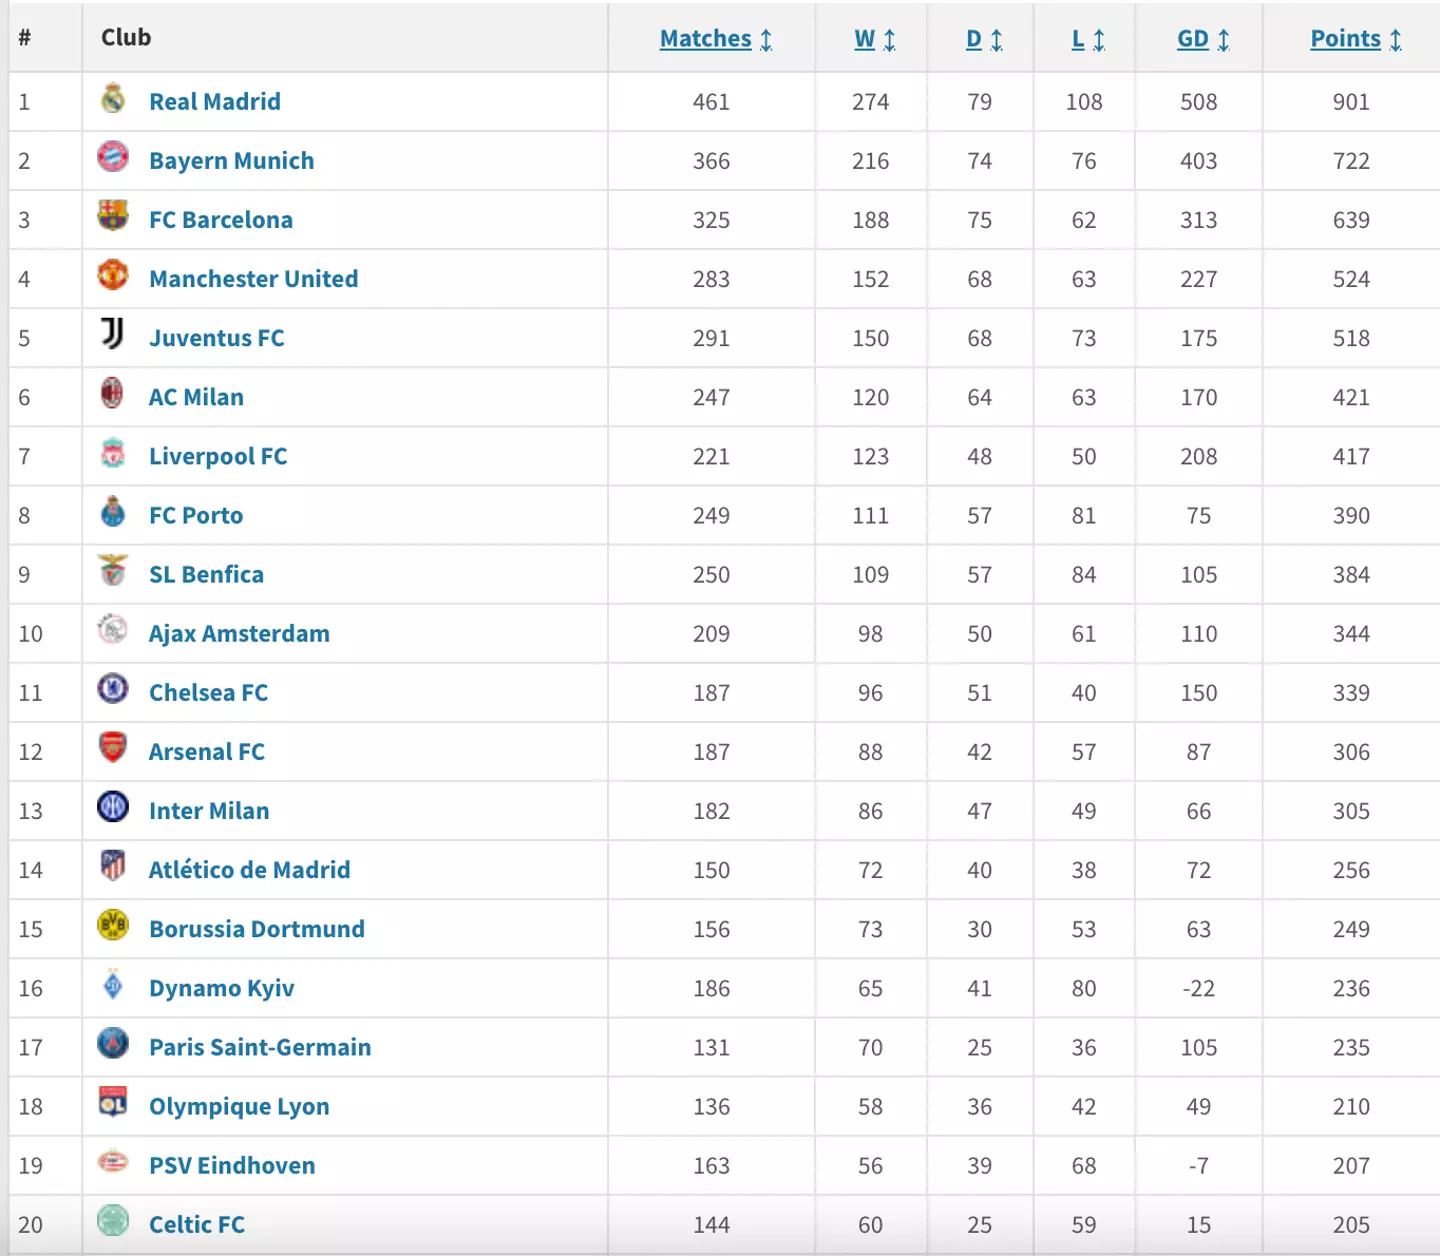 Real top the table with an incredible record. Image: Transfermarkt